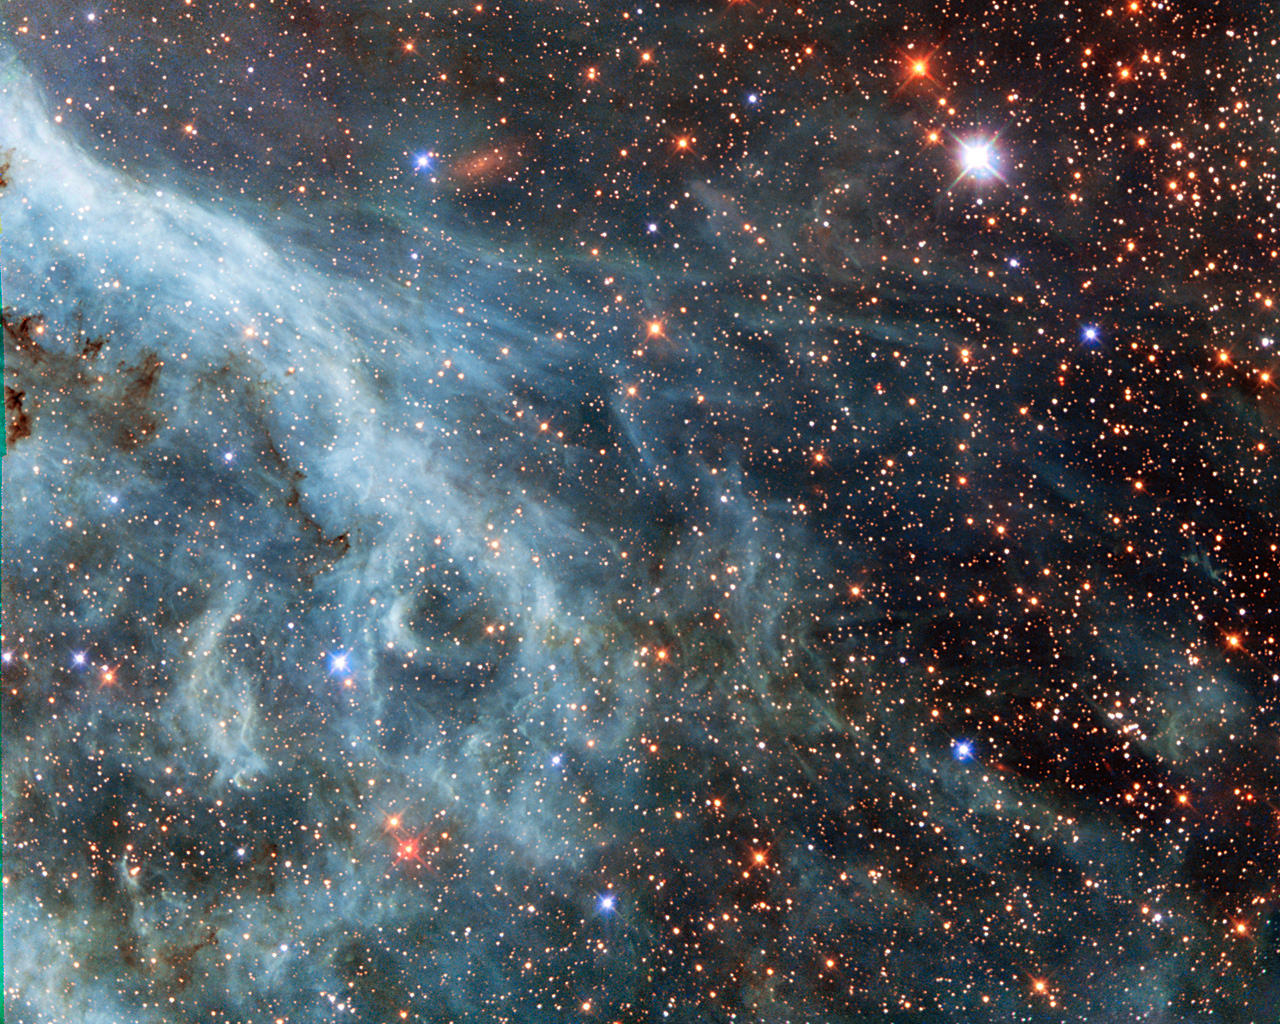 The brightly glowing plumes seen in this image are reminiscent of an underwater scene, with turquoise-tinted currents and nebulous strands reaching out into the surroundings. However, this is no ocean. This image actually shows part of the Large Magellanic Cloud (LMC), a small nearby galaxy that orbits our galaxy, the Milky Way, and appears as a blurred blob in our skies. The NASA/ESA Hubble Space Telescope has peeked many times into this galaxy, releasing stunning images of the whirling clouds of gas and sparkling stars (opo9944a, heic1301, potw1408a). This image shows part of the Tarantula Nebula's outskirts. This famously beautiful nebula, located within the LMC, is a frequent target for Hubble (heic1206, heic1402).  In most images of the LMC the colour is completely different to that seen here. This is because, in this new image, a different set of filters was used. The customary R filter, which selects the red light, was replaced by a filter letting through the near-infrared light. In traditional images, the hydrogen gas appears pink because it shines most brightly in the red. Here however, other less prominent emission lines dominate in the blue and green filters. This data is part of the Archival Pure Parallel Project (APPP), a project that gathered together and processed over 1000 images taken using Hubble’s Wide Field Planetary Camera 2, obtained in parallel with other Hubble instruments. Much of the data in the project could be used to study a wide range of astronomical topics, including gravitational lensing and cosmic shear, exploring distant star-forming galaxies, supplementing observations in other wavelength ranges with optical data, and examining star populations from stellar heavyweights all the way down to solar-mass stars. A version of this image was entered into the Hubble’s Hidden Treasures image processing competition by contestant Josh Barrington.